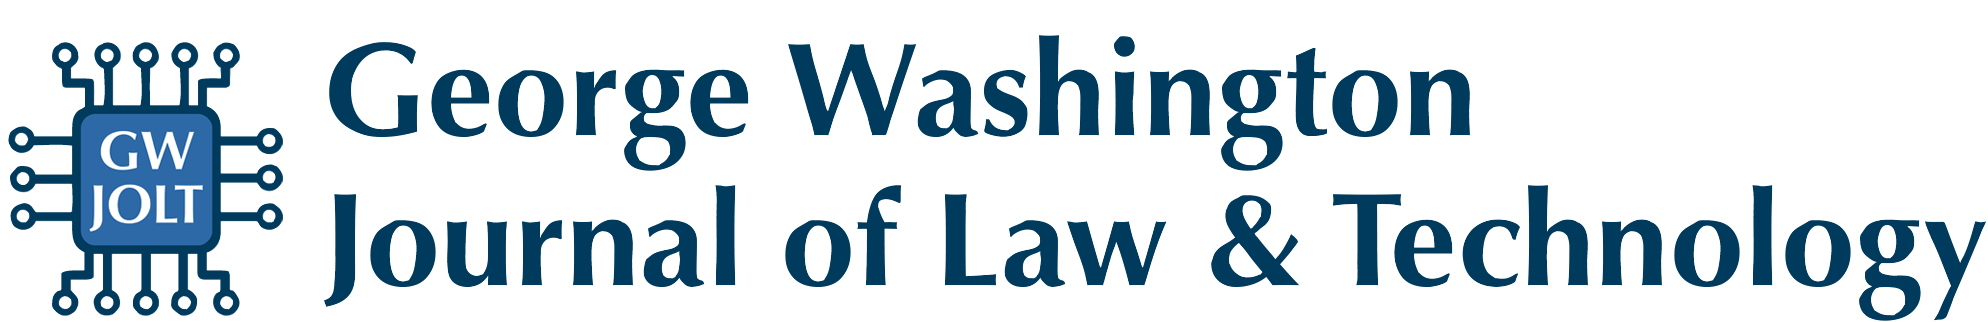 GW Journal of Law and Technology